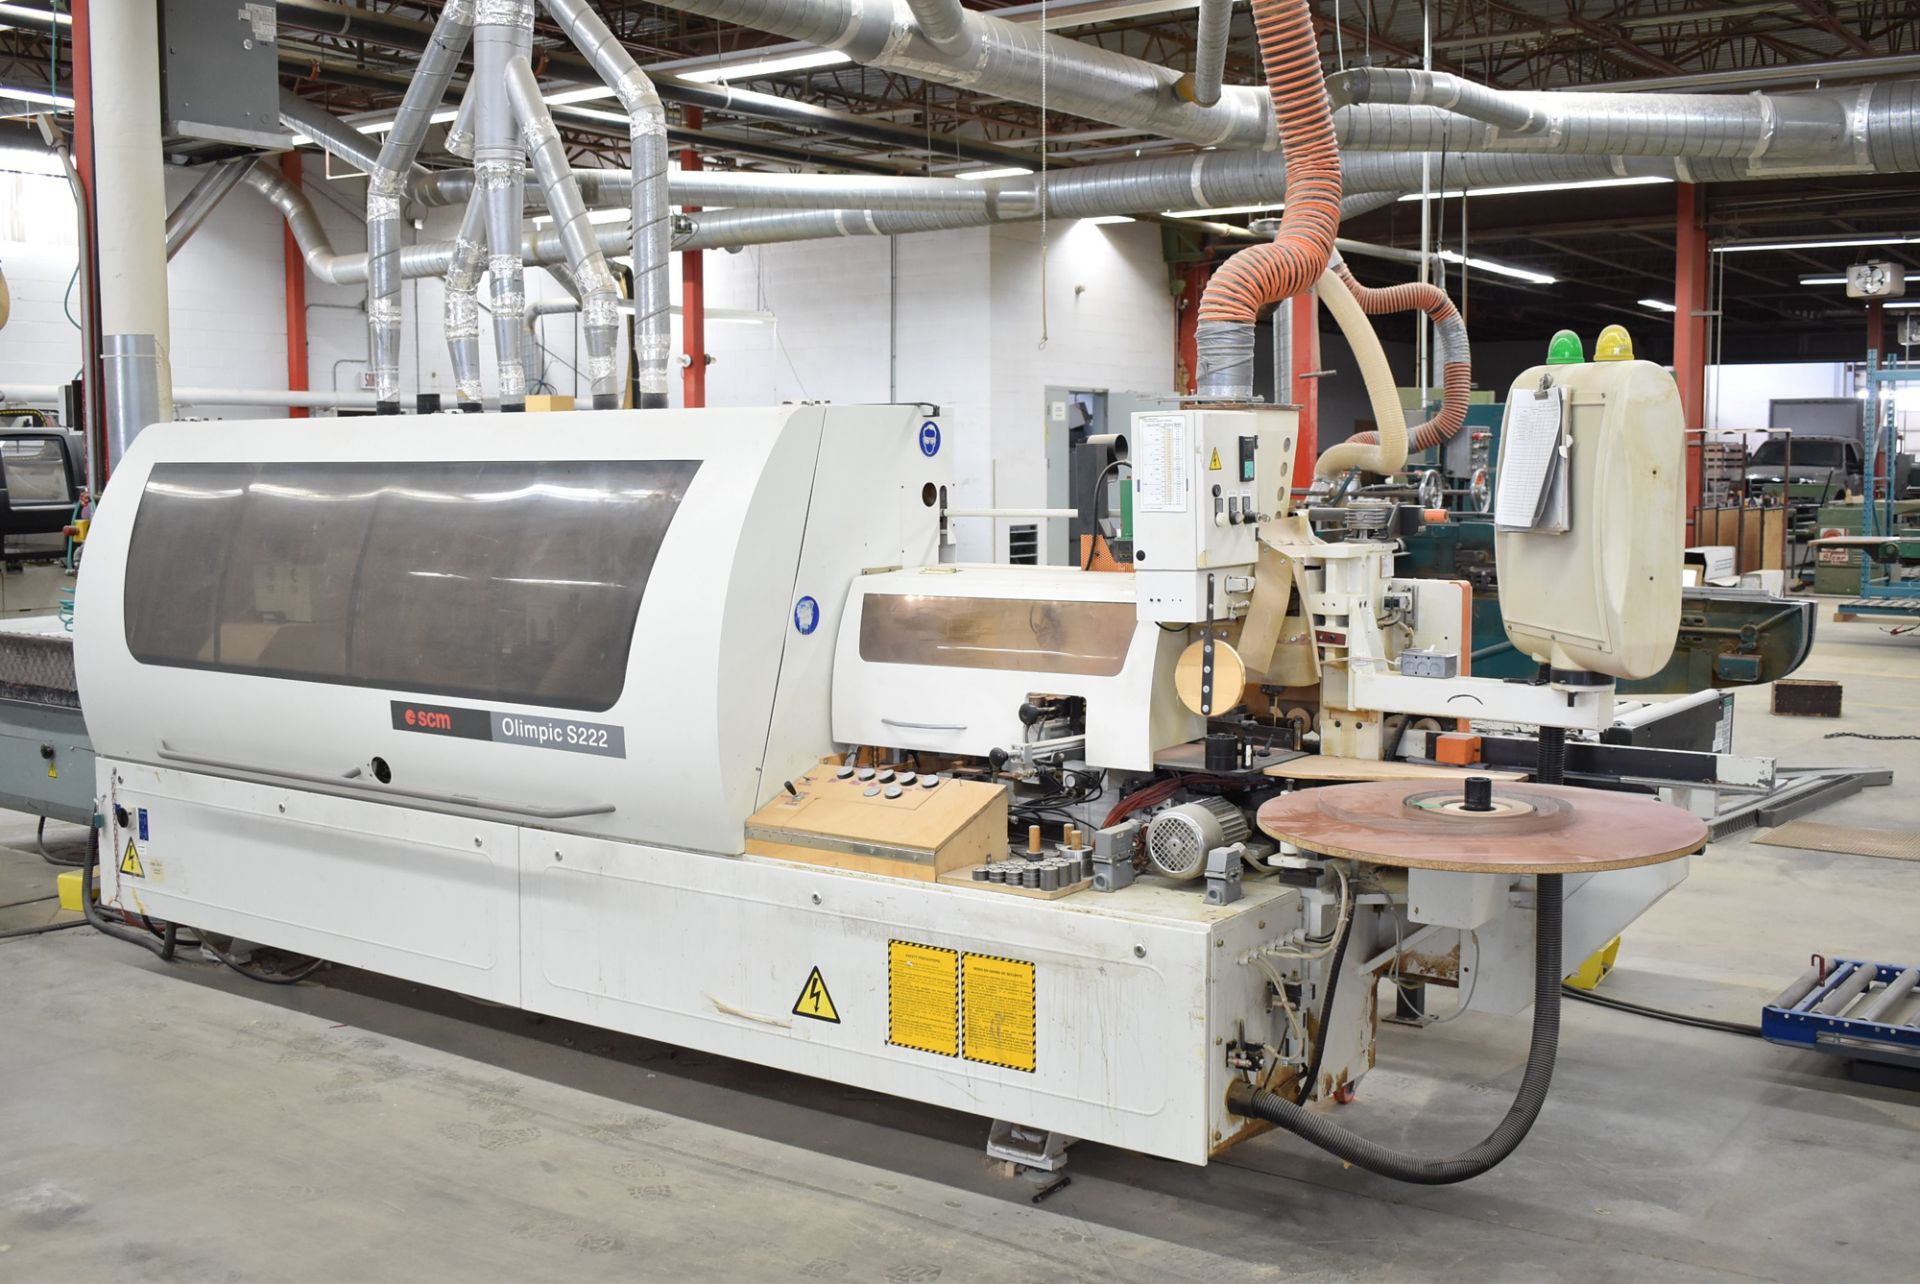 SCM (2003) OLYMPIC S222 CNC AUTOMATIC EDGE BANDING MACHINE WITH MAGELIS CNC CONTROL, 0.86" MAX. EDGE - Image 5 of 11